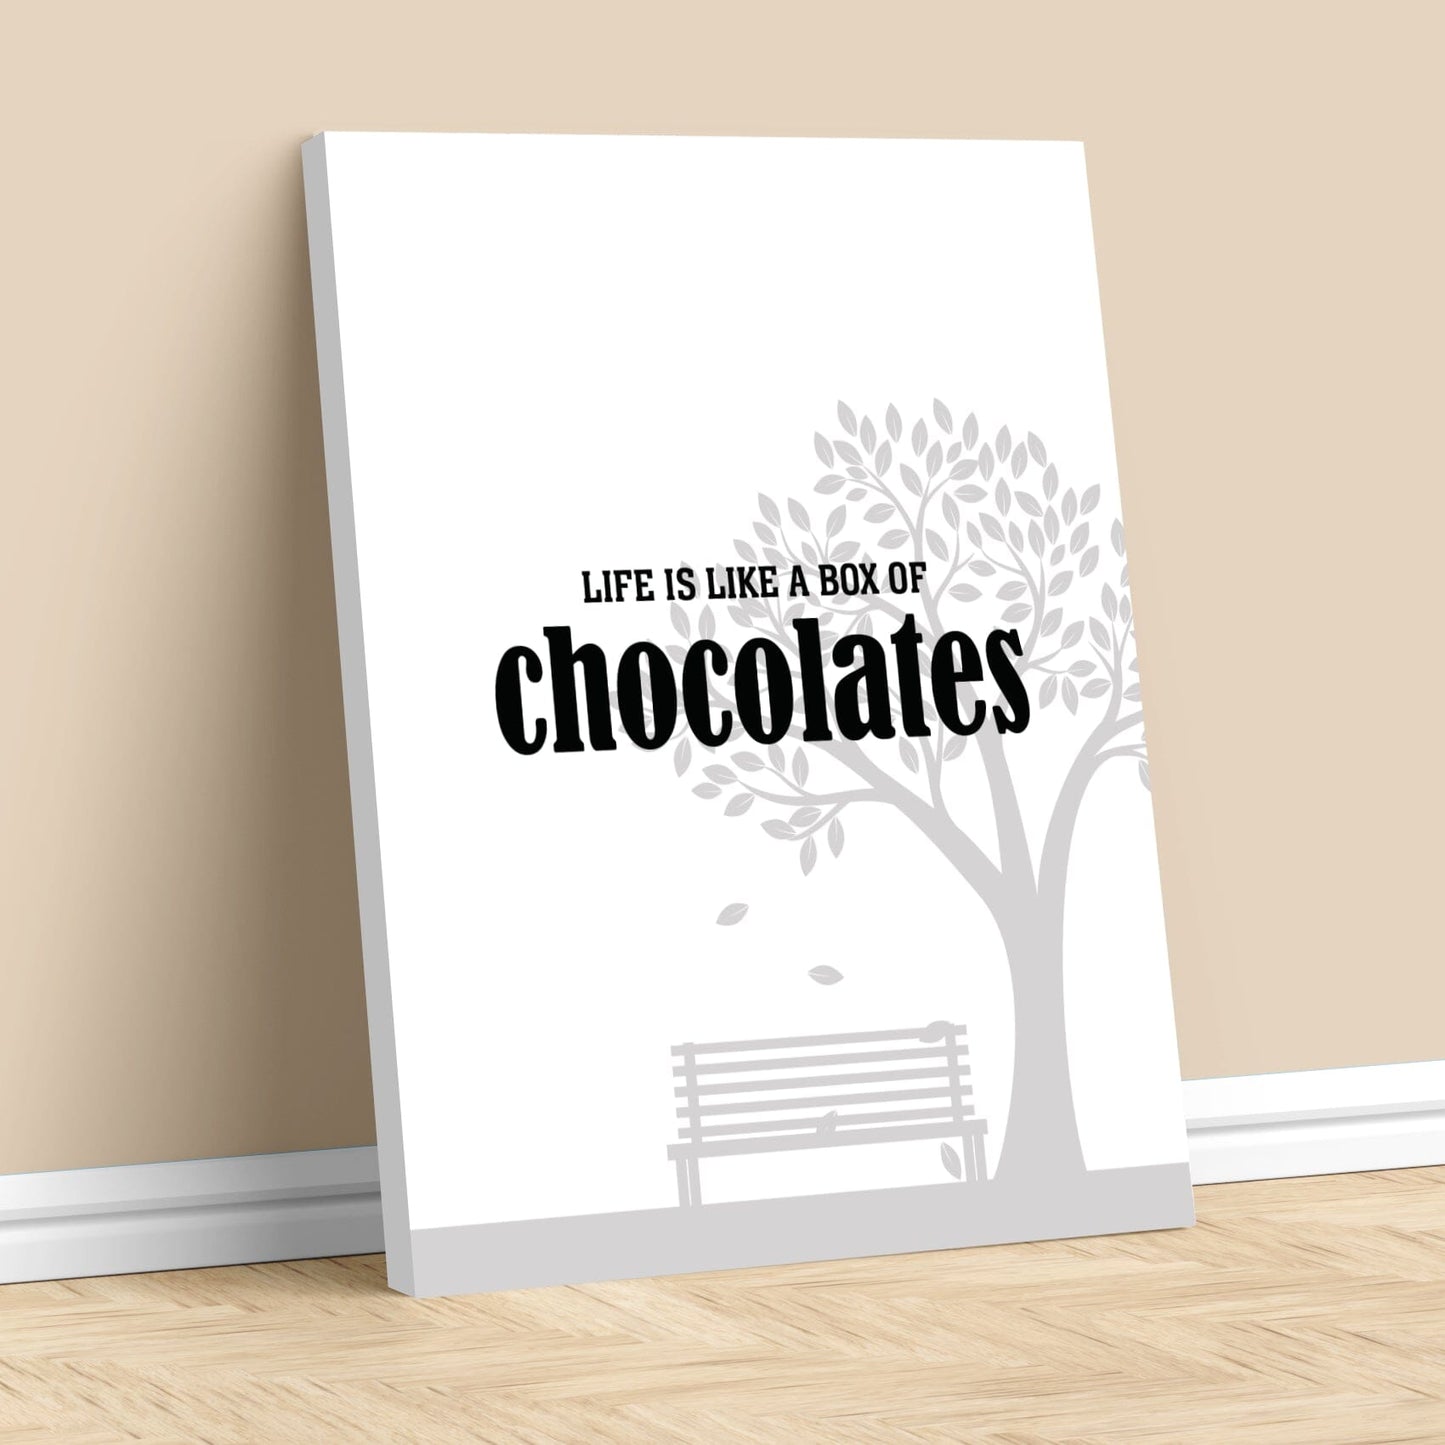 Life is Like a Box of Chocolates - Wise and Witty Quote Art Wise and Wiseass Quotes Song Lyrics Art 11x14 Canvas Wrap 